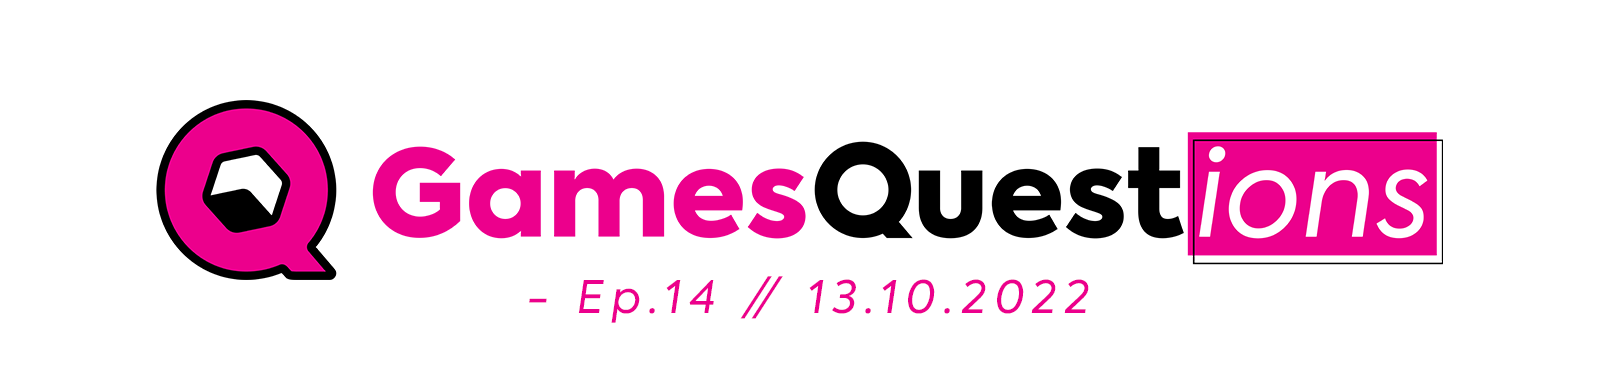 GamesQuestions Ep.14 // 13.10.2022